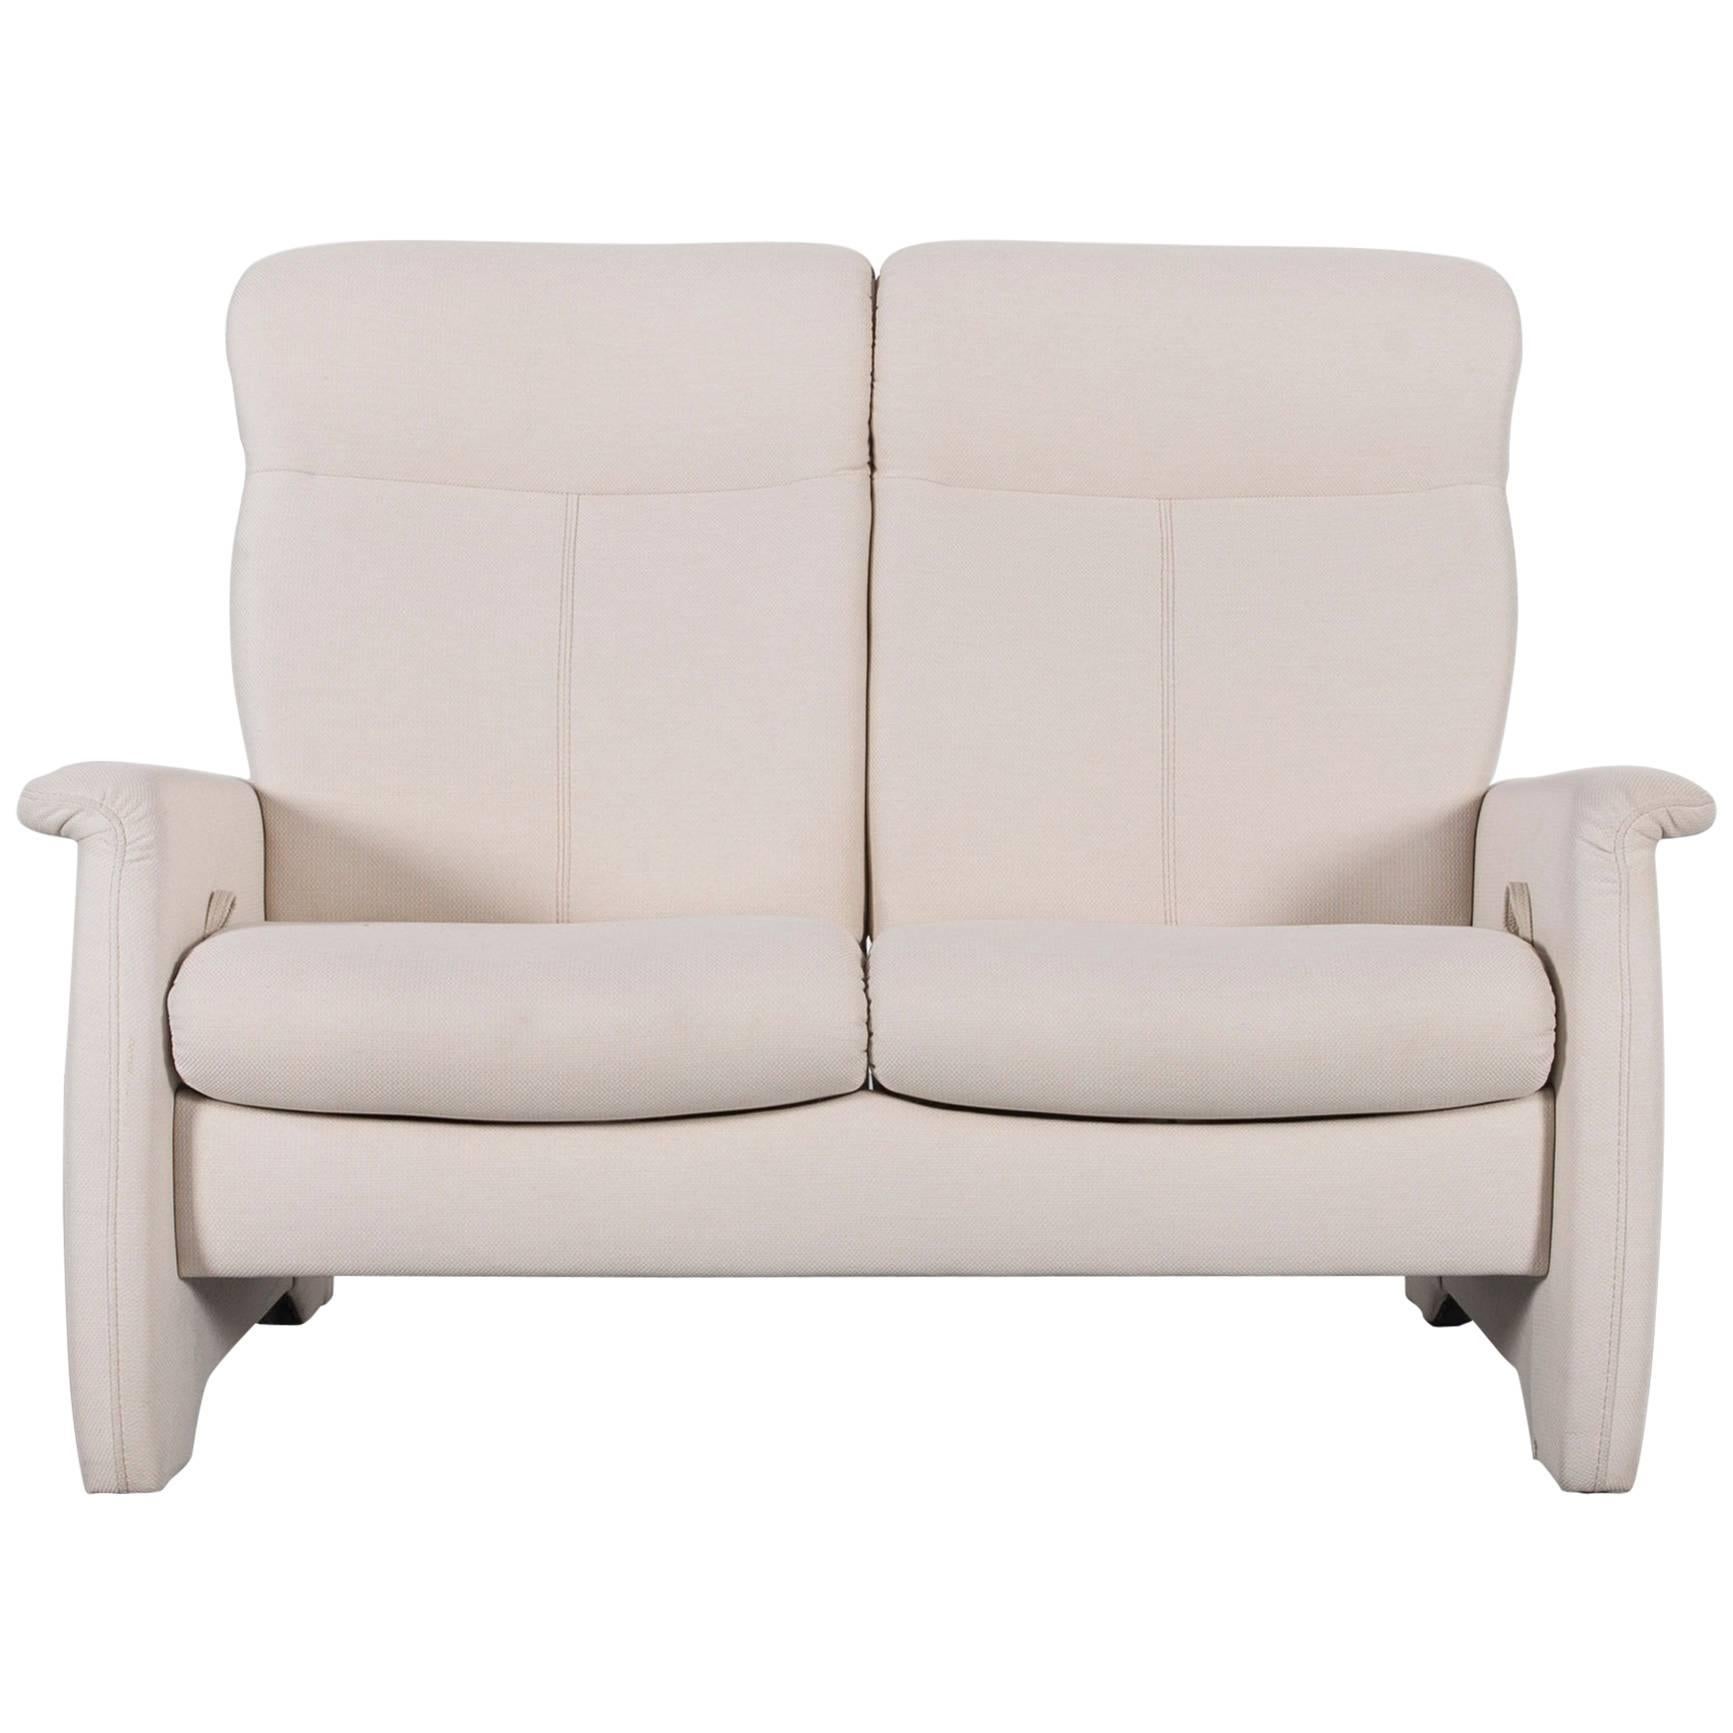 Himolla Fabric Sofa Off-White Two-Seat Couch Recliner For Sale